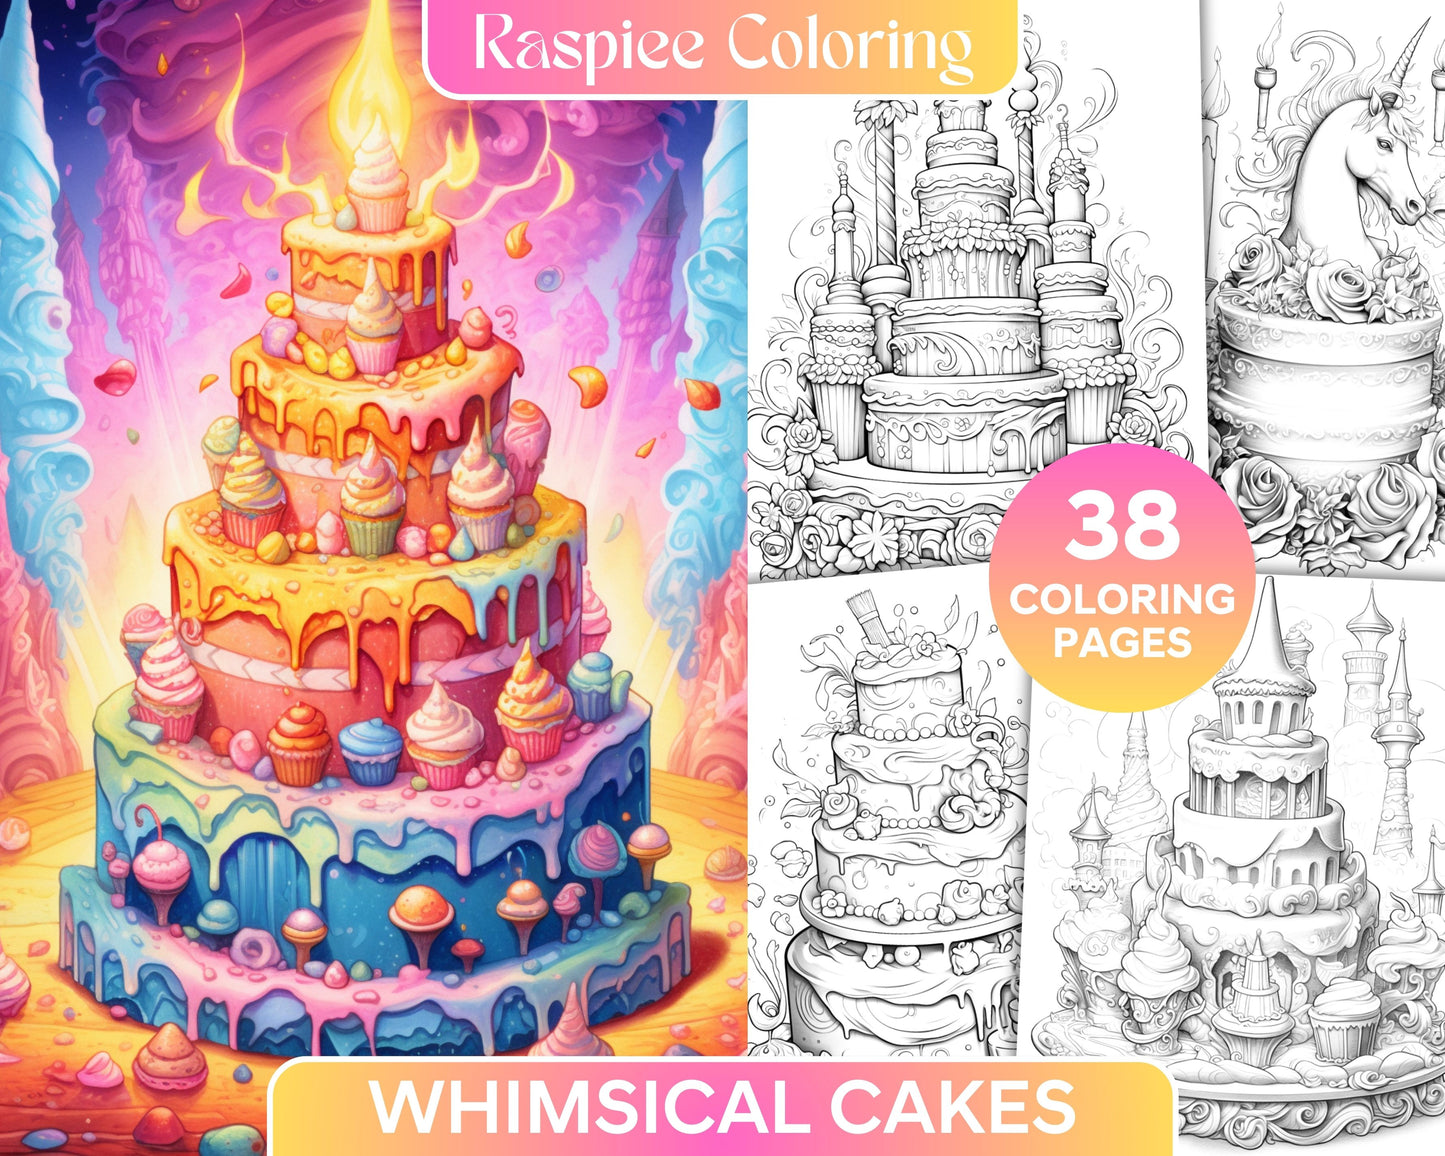 whimsical cakes grayscale coloring page, adult coloring page with cake illustration, grayscale art of whimsical cakes for adults, relaxing cake coloring page for stress relief, detailed grayscale cake coloring sheet